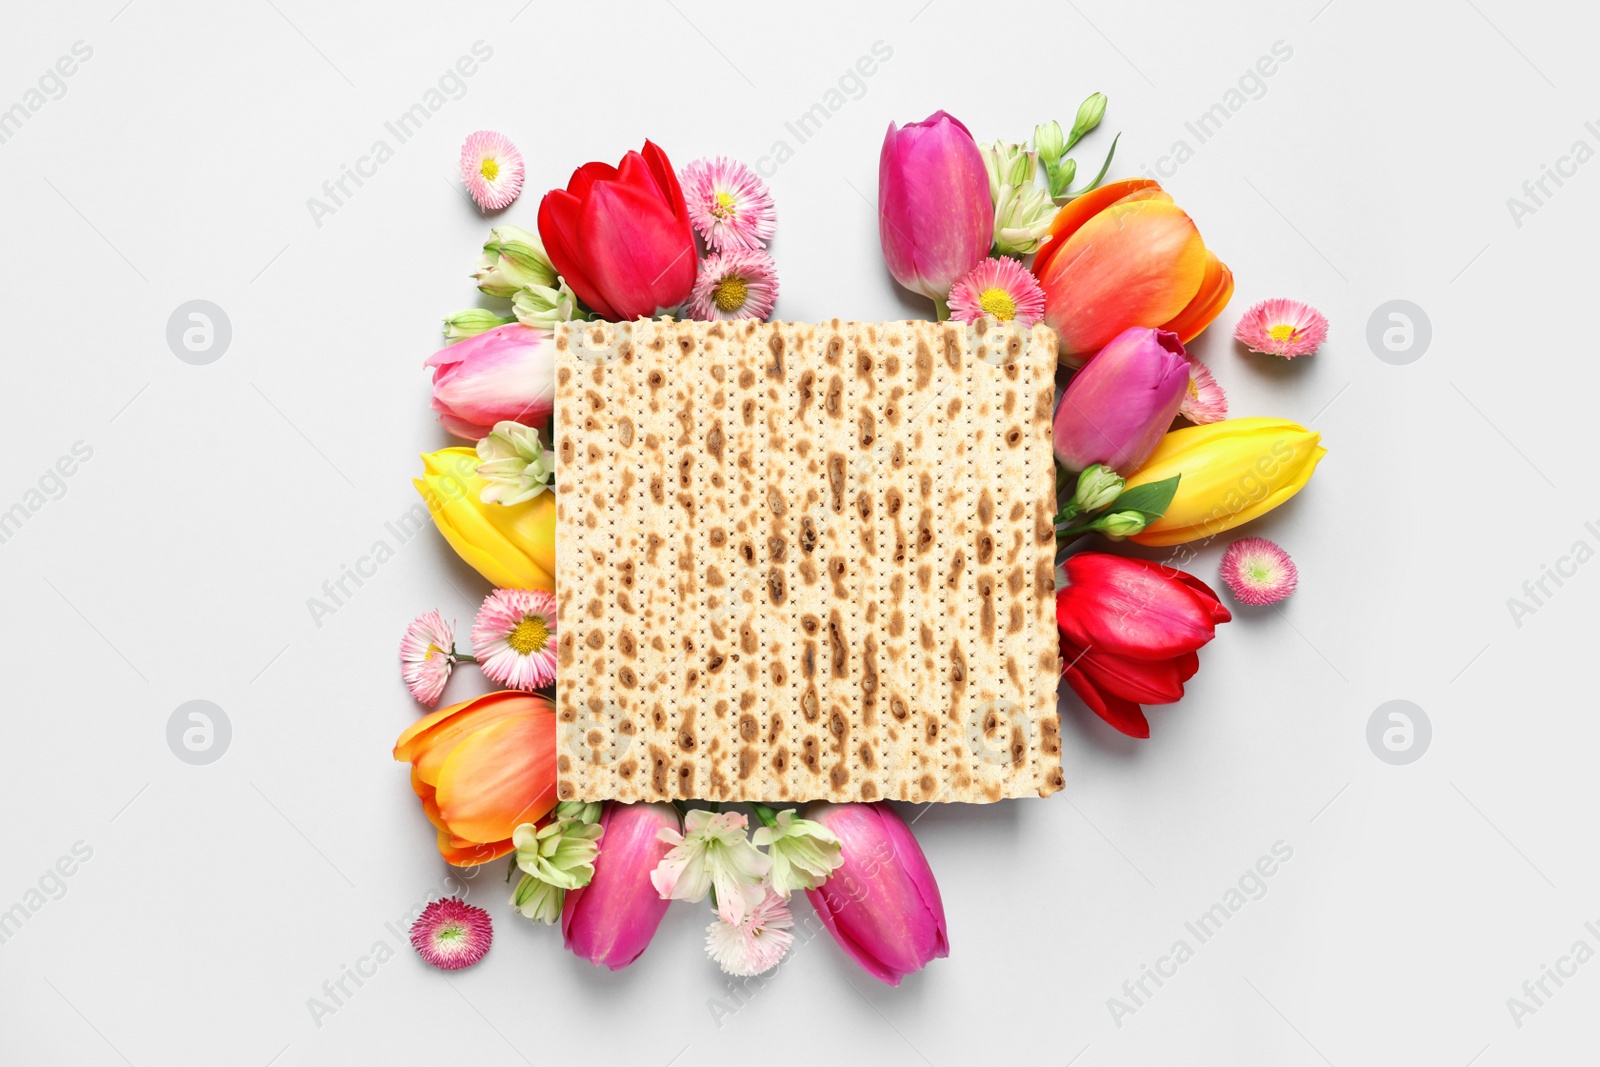 Image of Tasty matzo and flowers on light background, flat lay. Passover (Pesach) celebration